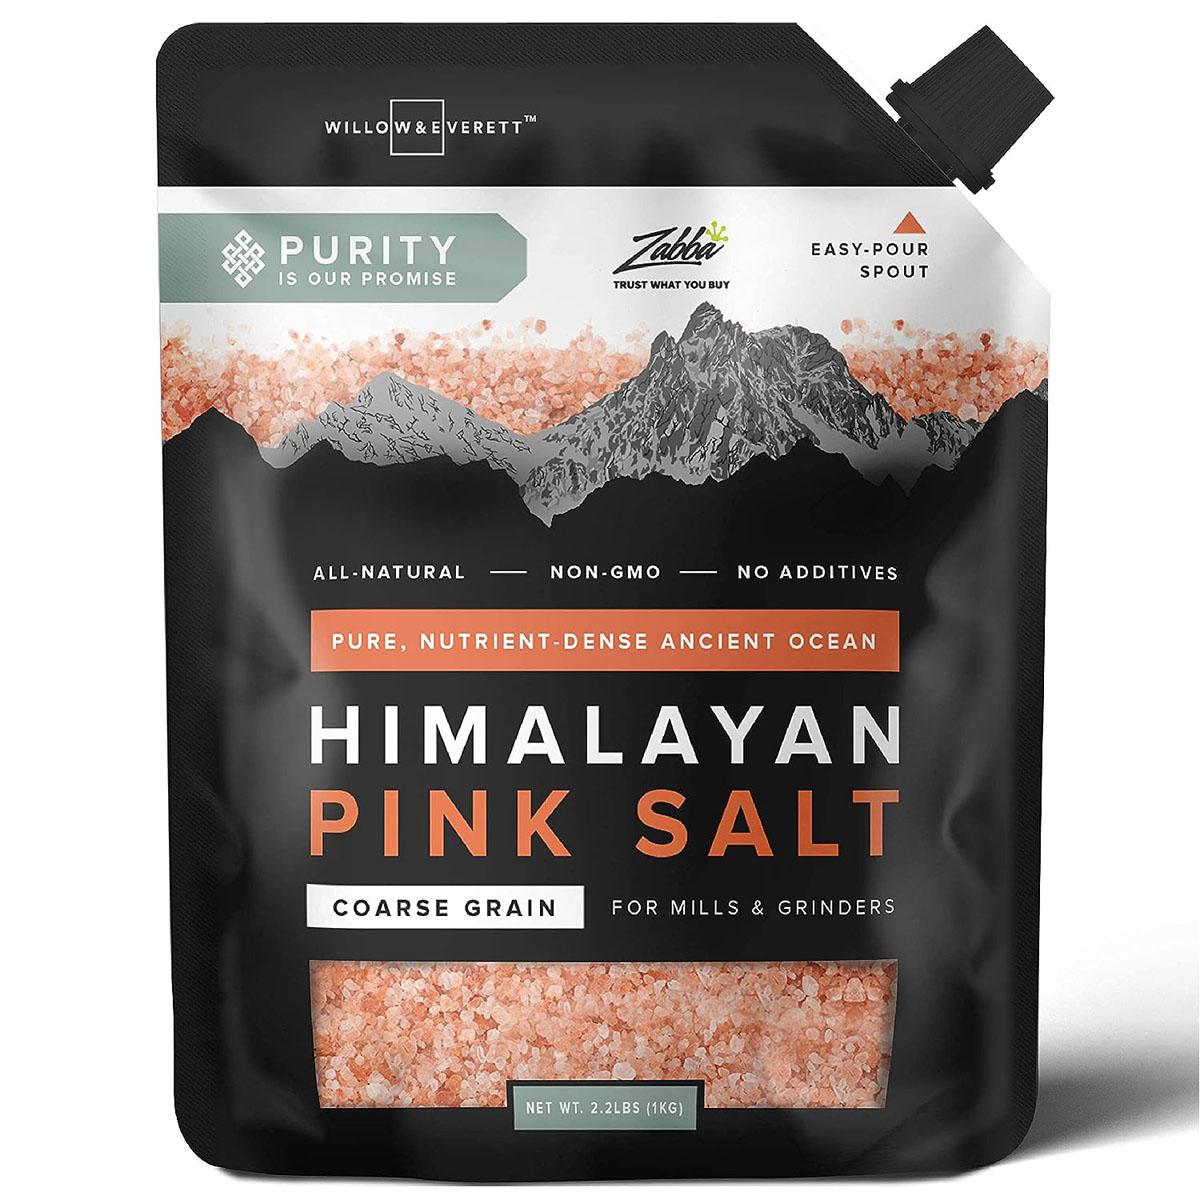 Willow and Everett Himalayan Pink Salt for $6.48 Shipped